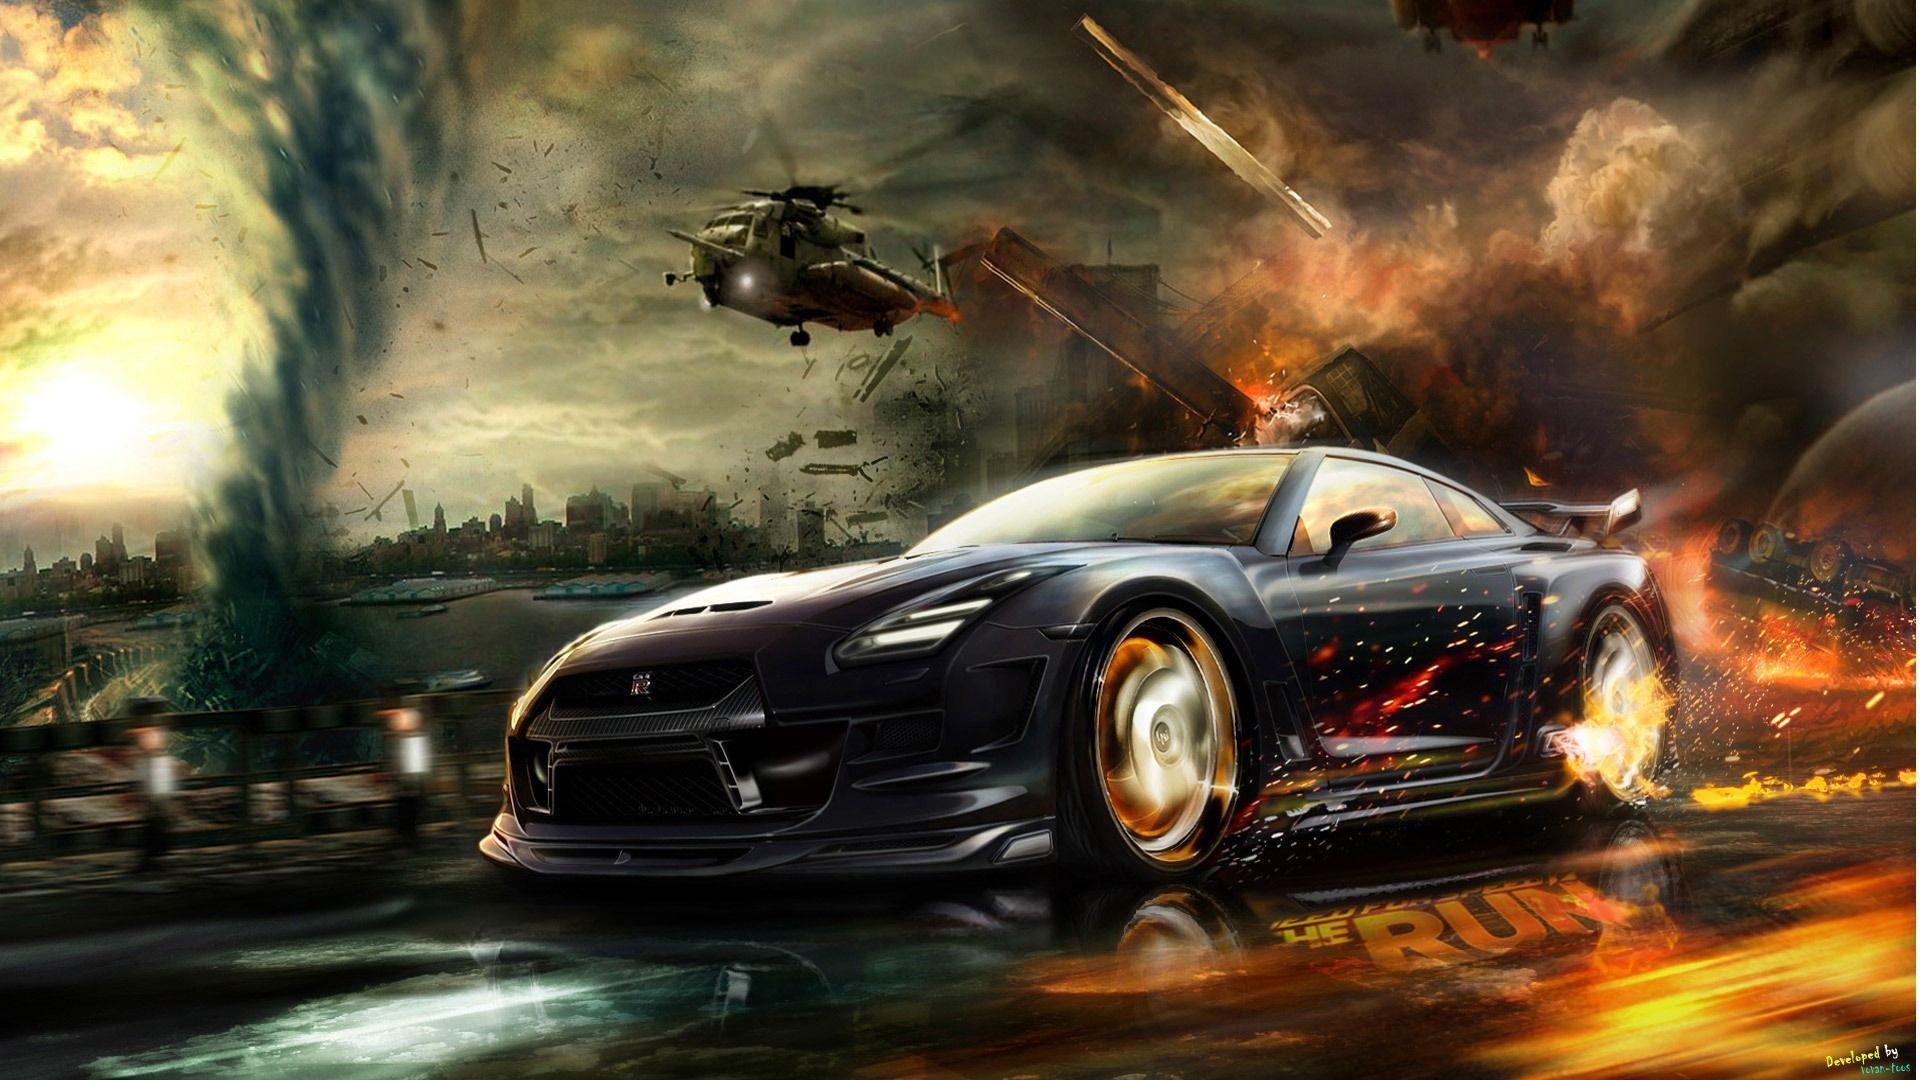 Need For Speed Cars Wallpapers Top Free Need For Speed Cars Backgrounds Wallpaperaccess